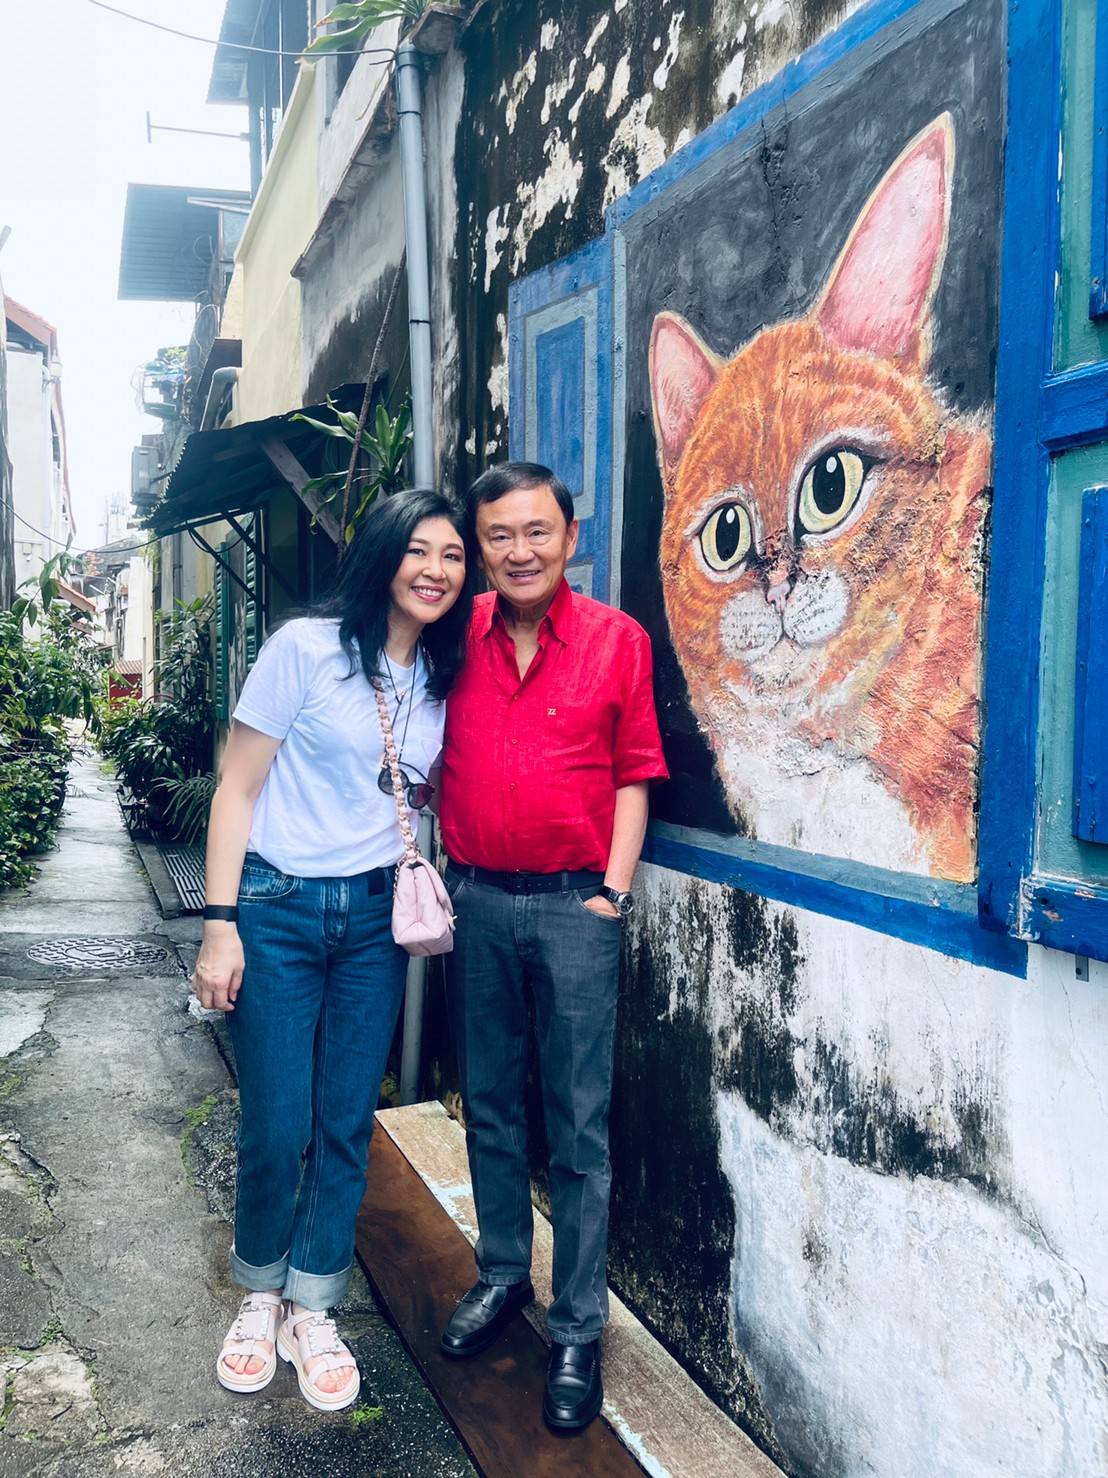 Both former Prime Ministers even took snaps at some of the island's most famous murals. Image credit: Yingluck Shinawatra